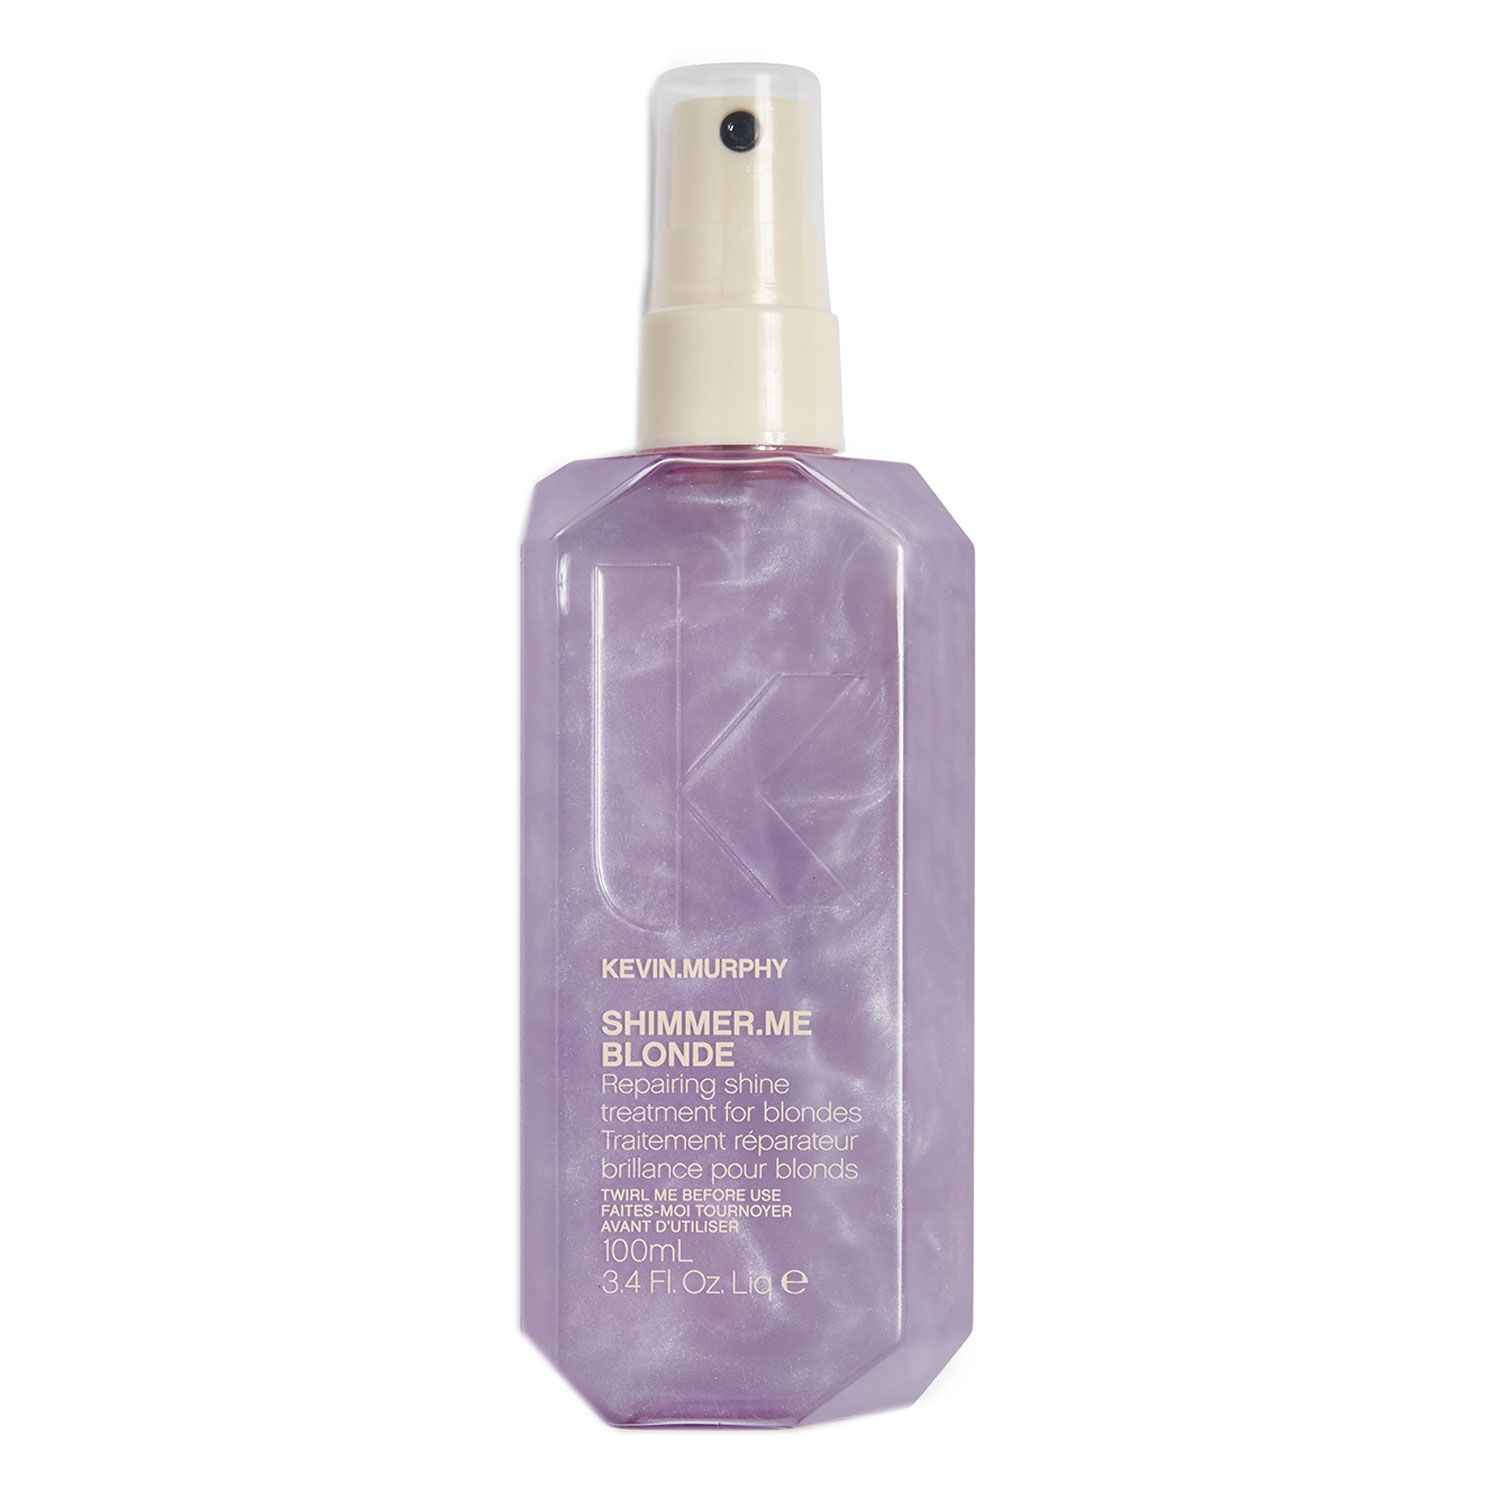 Product image from Shimmer.Me - Blonde Repairing Shine Treatment